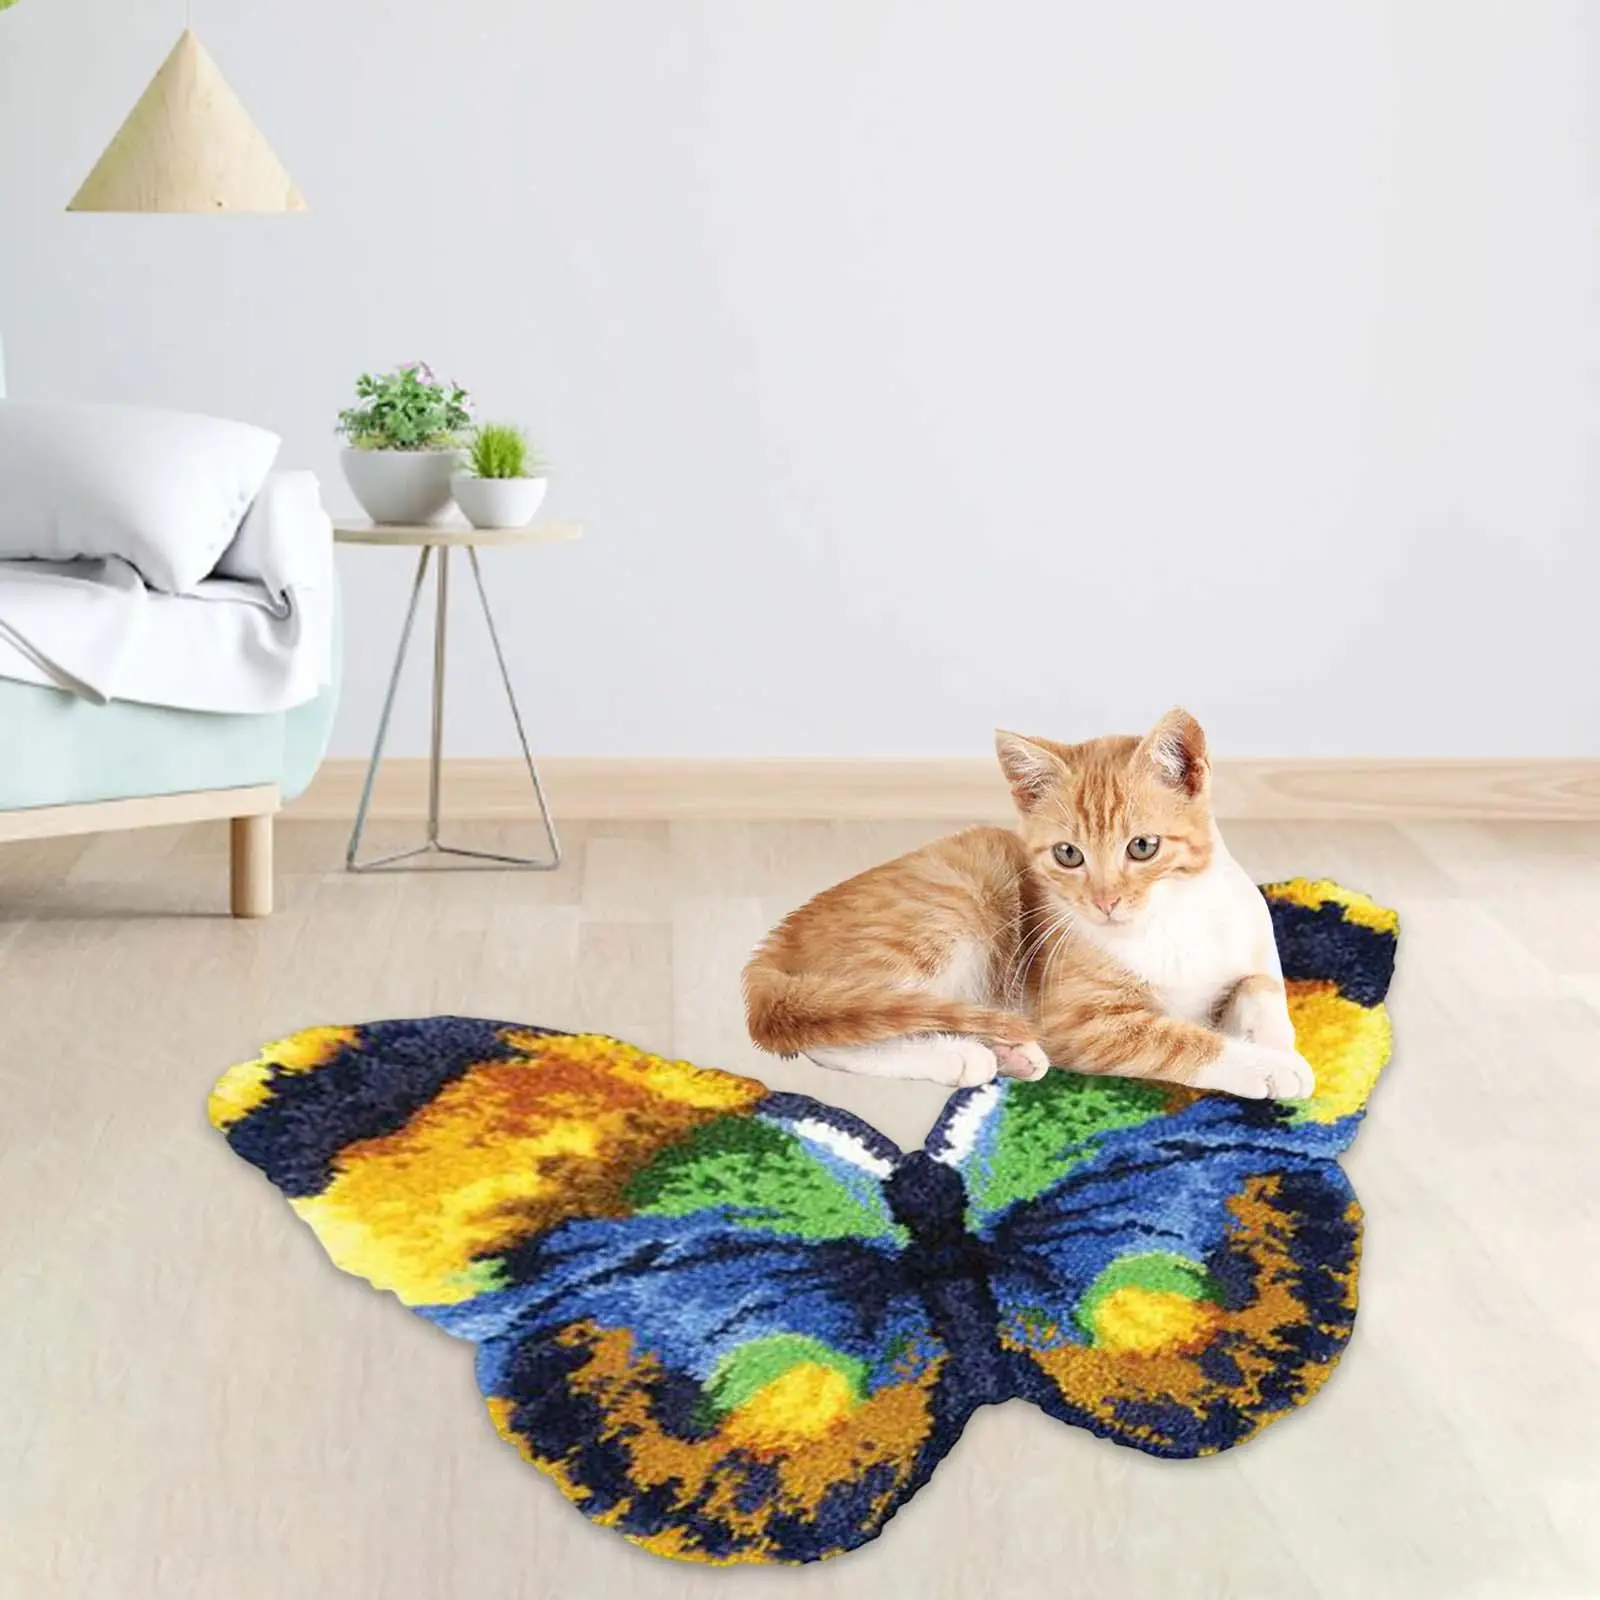 Latch DIY Rug Making Kit Butterfly Creative Carpet Making Kit Embroidery Carpet Set for Halloween Beginners Parents Adults